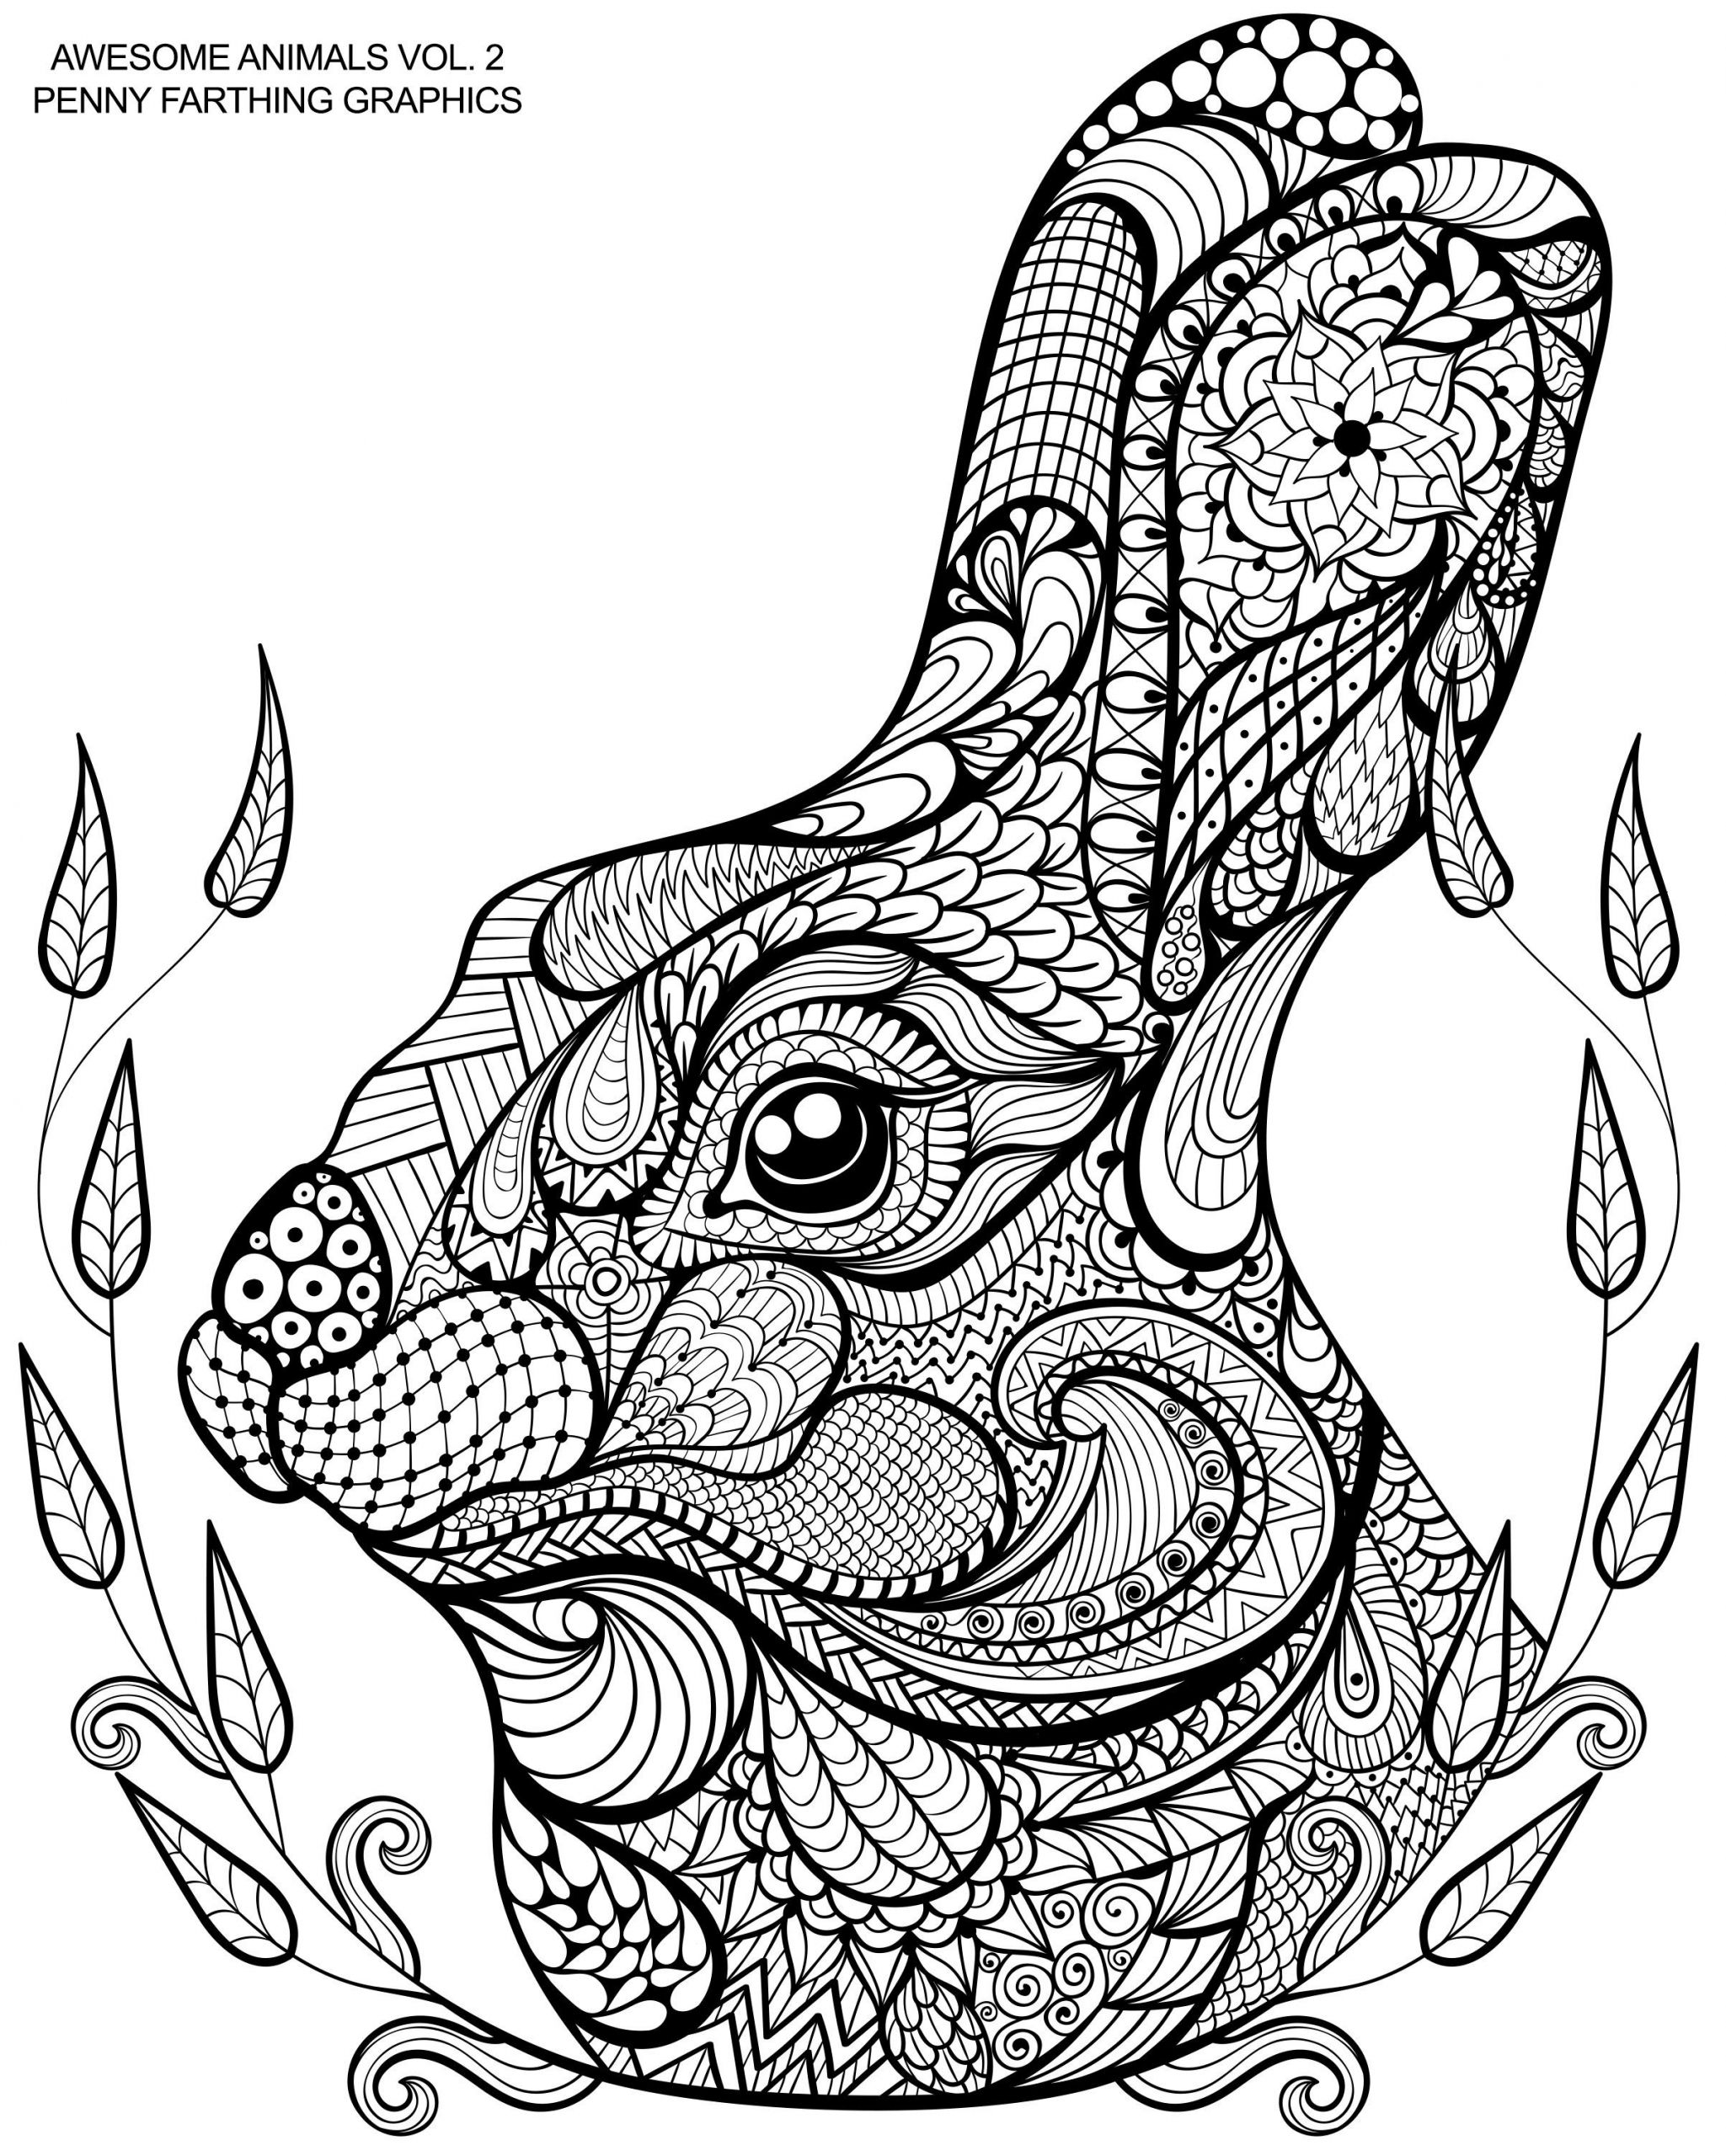 Bunny Coloring Pages For Adults
 Cute bunny from “Awesome Animals Vol 2"